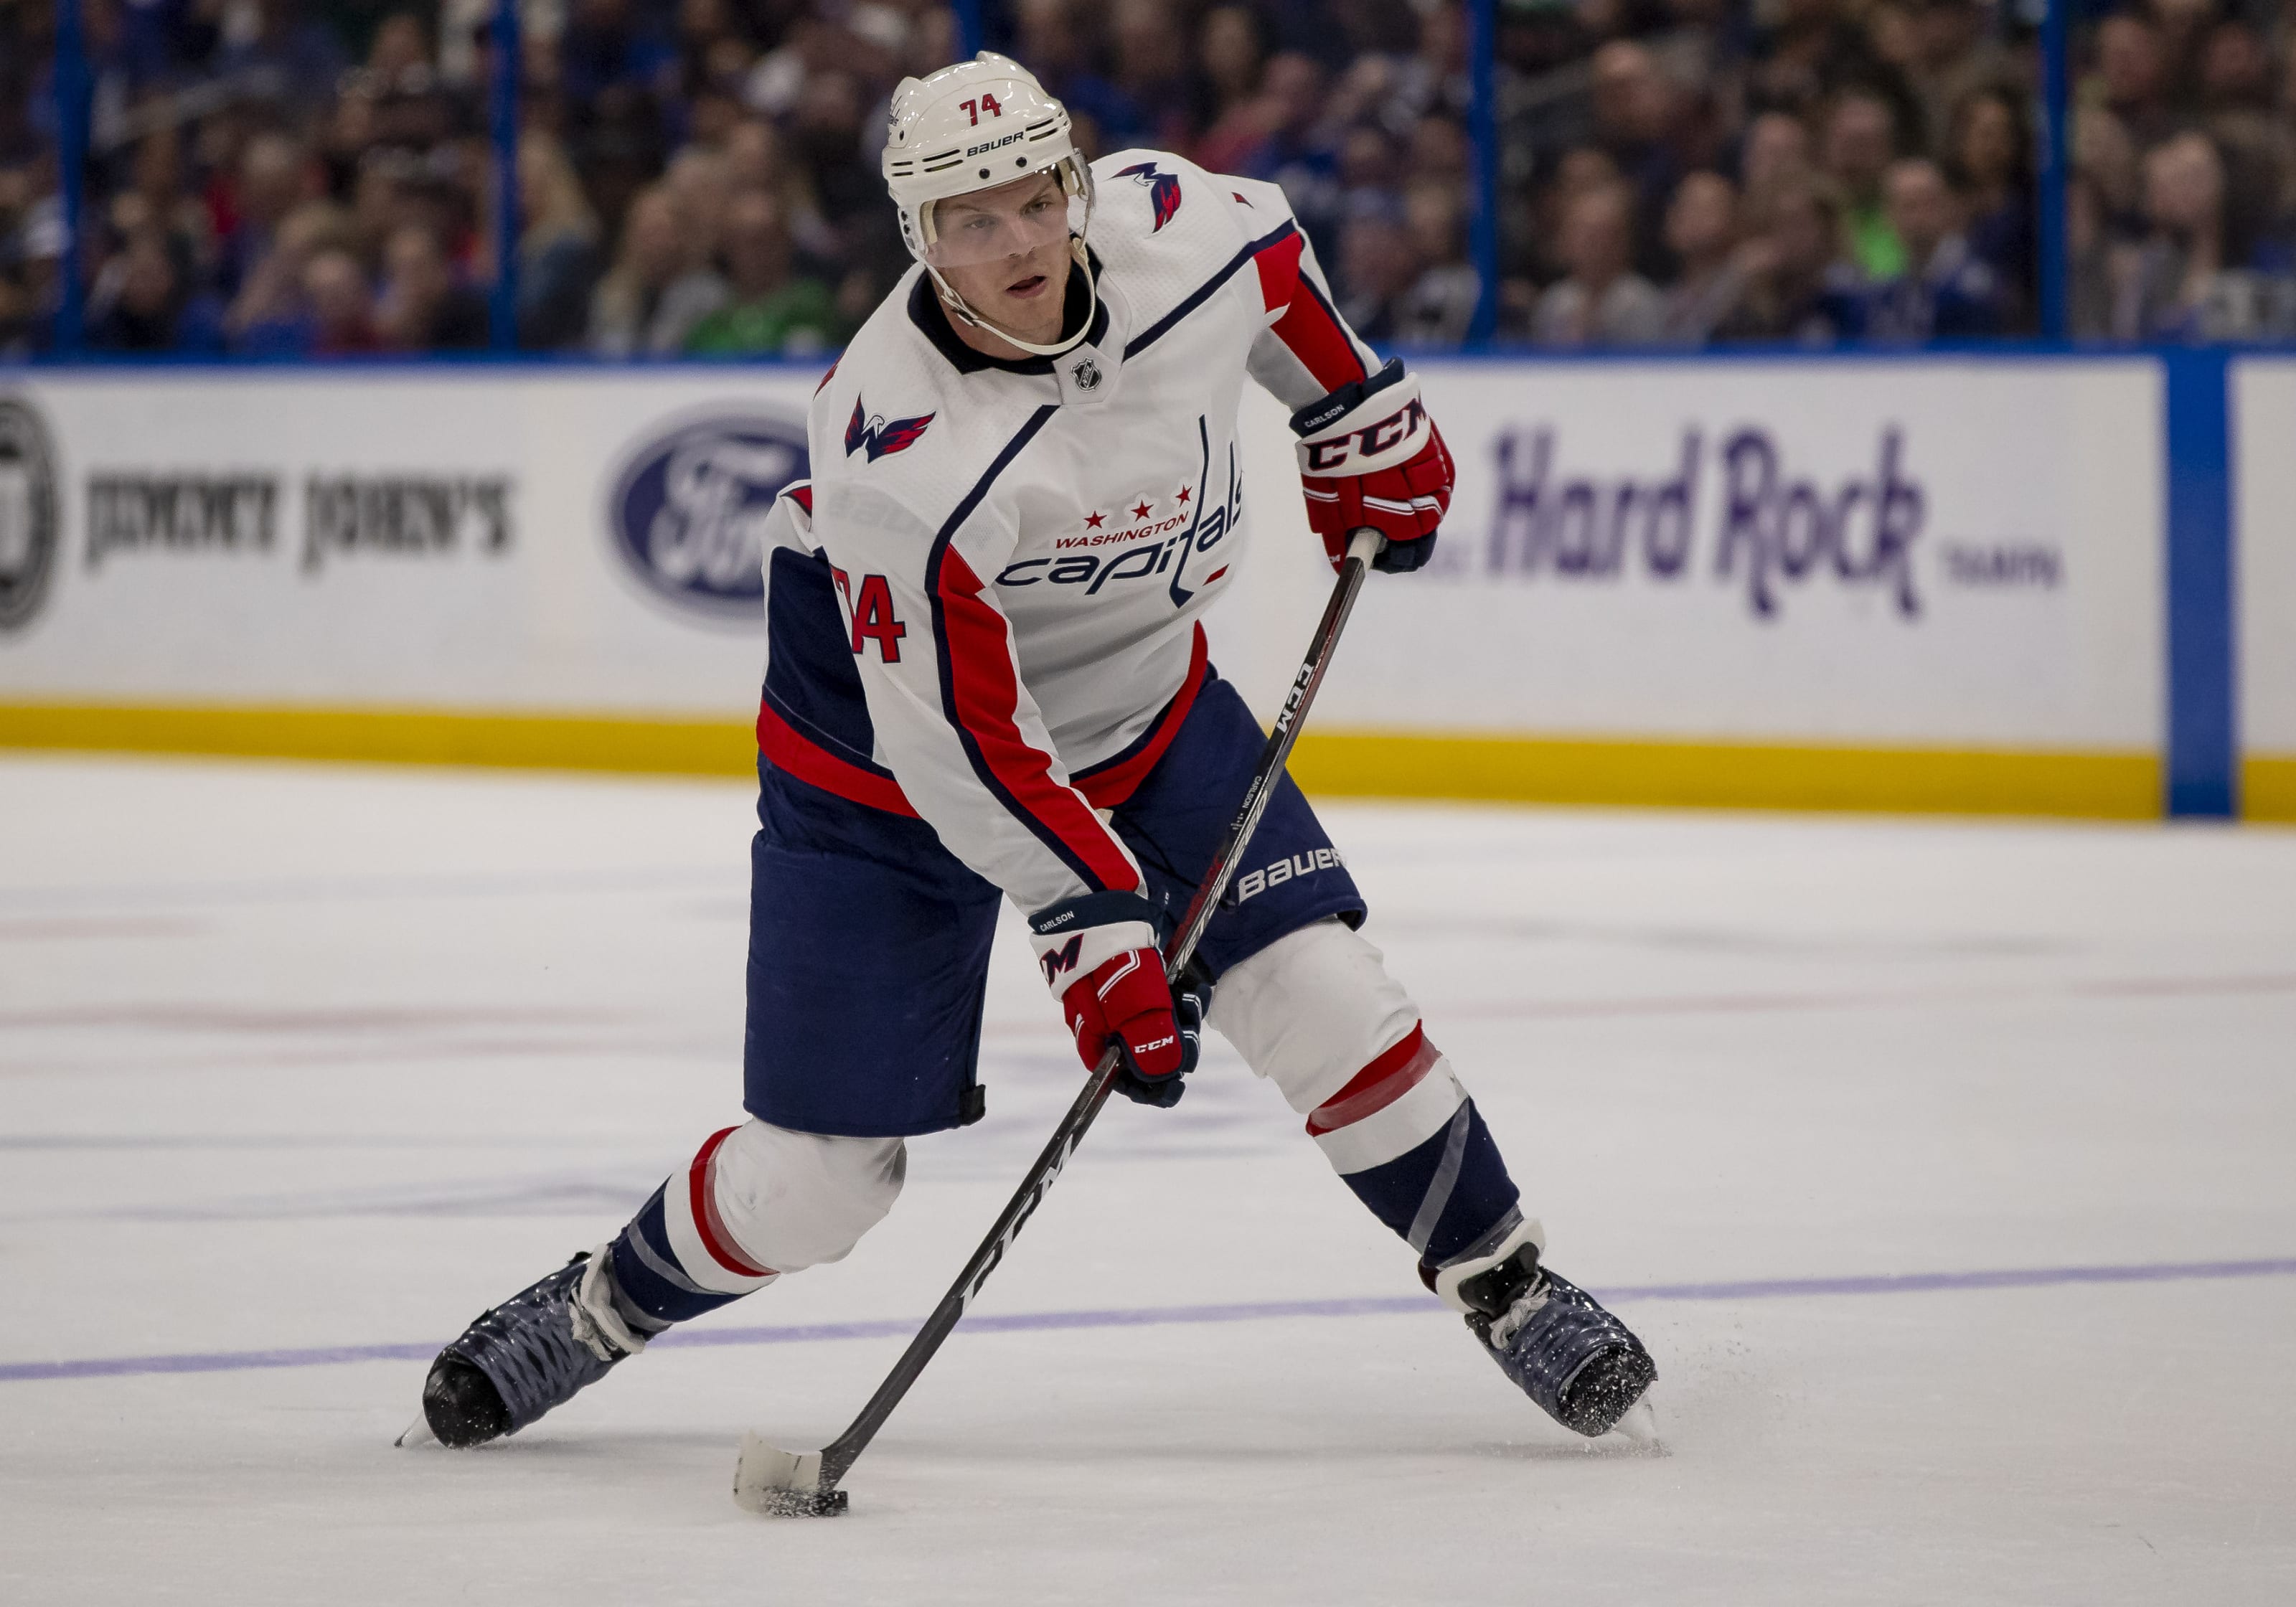 2019-20 Capitals Preview: Three Predictions For John Carlson - Page 3